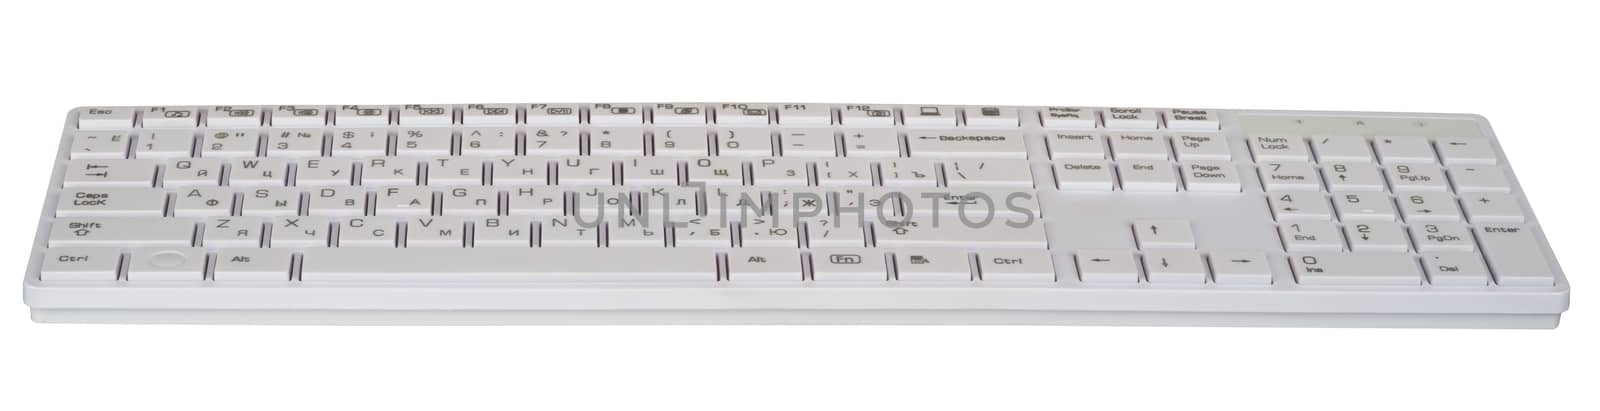 Computer keyboard on isolated white background, front view